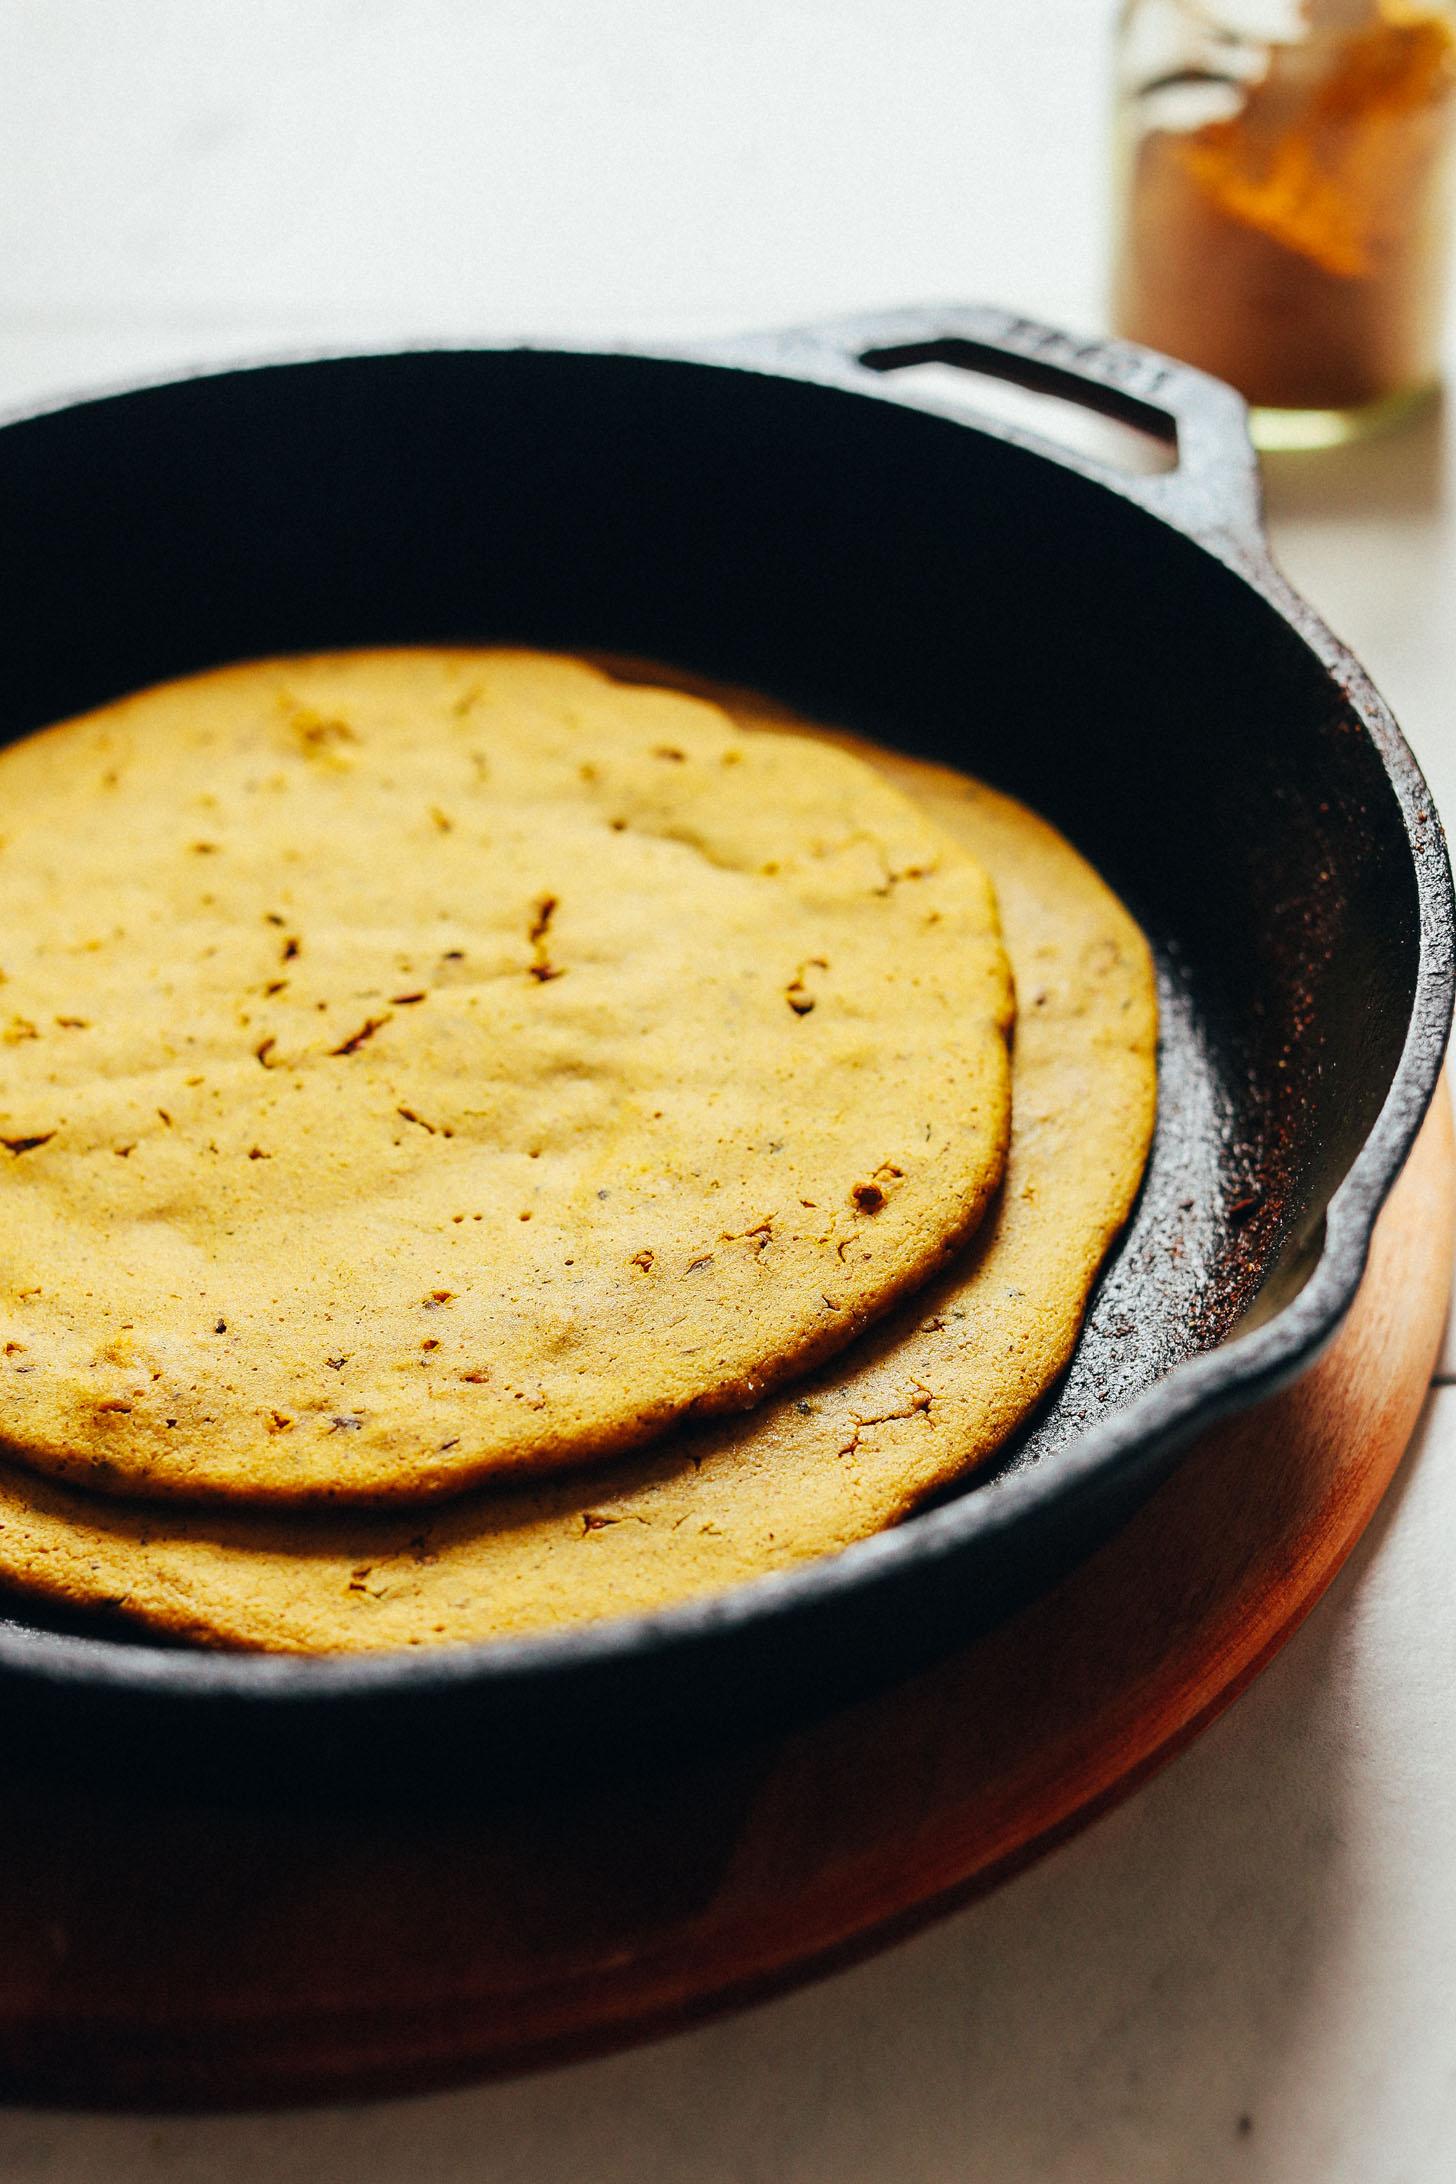 Freshly cooked Curried Socca bread resting in a skillet